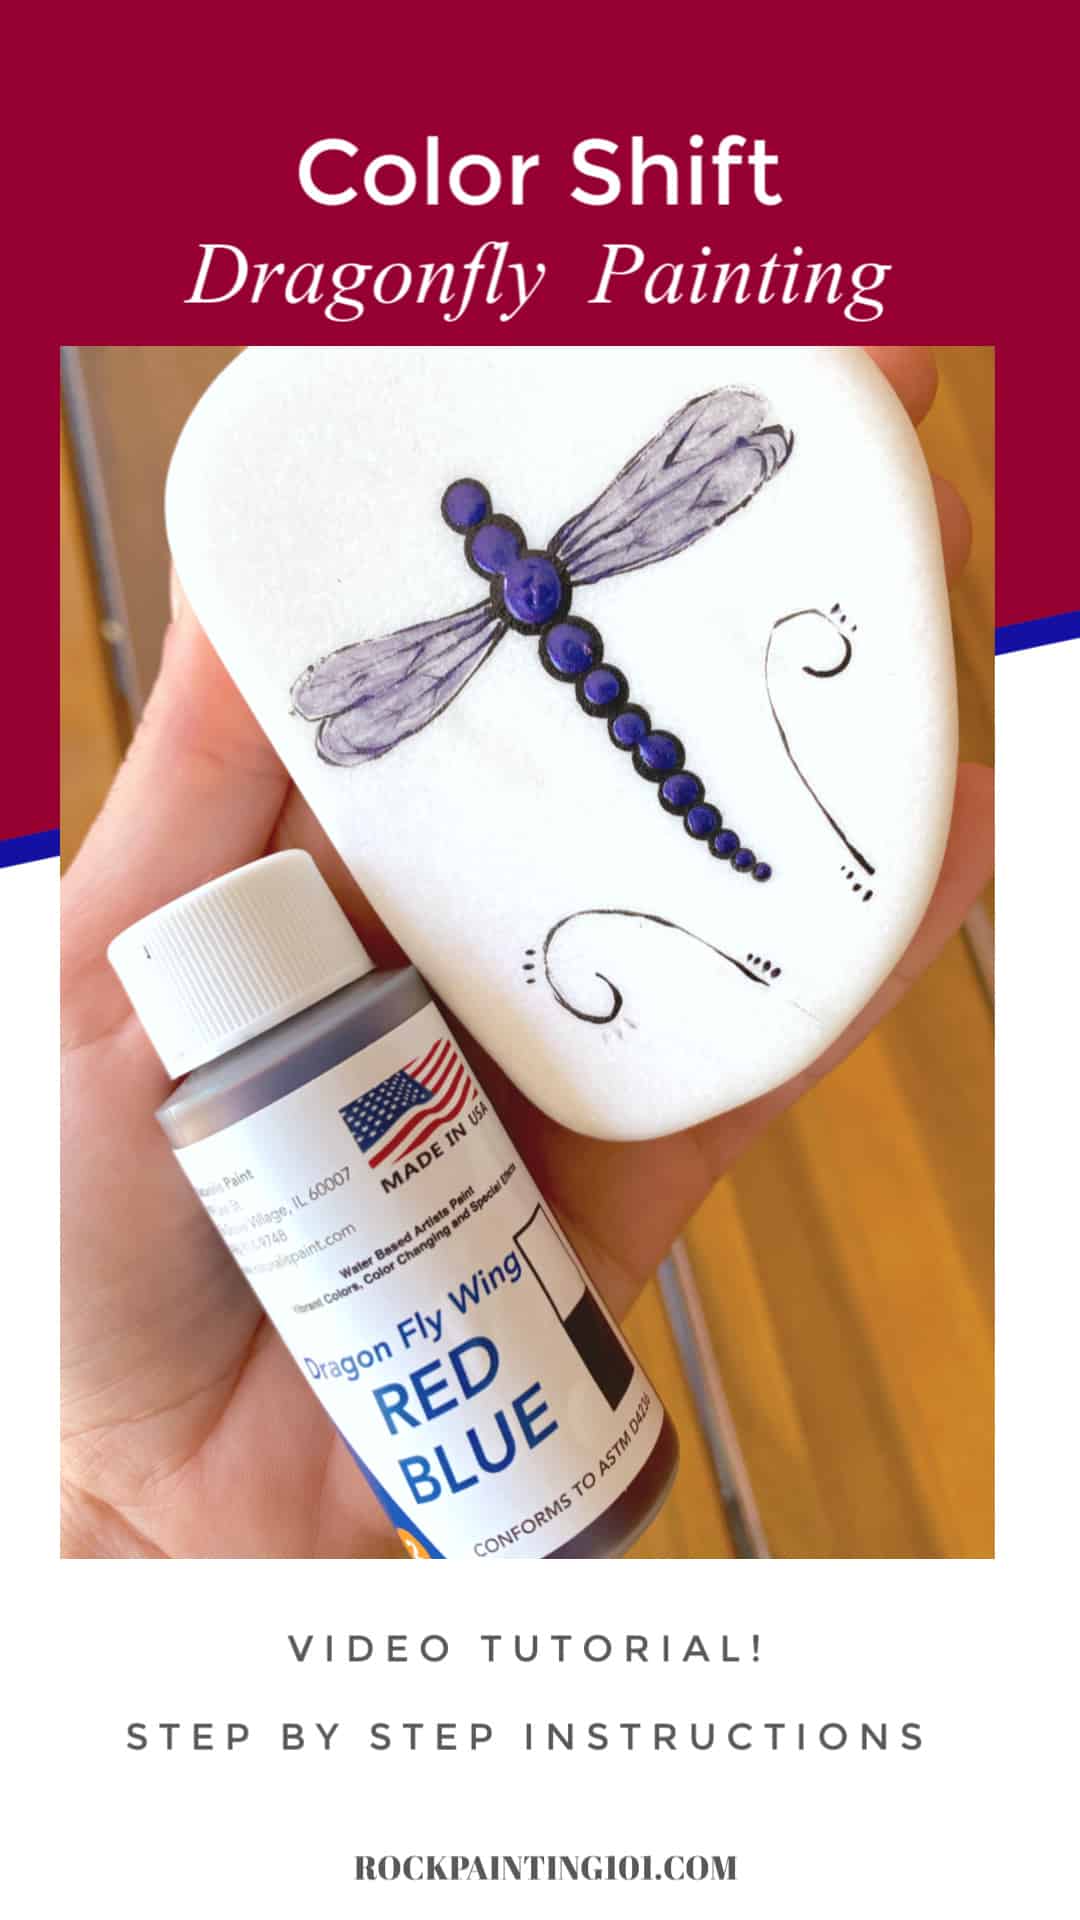 In today's tutorial we are teaching you how to paint dragonfly rocks. This tutorial is perfect for the rock painting beginner and features a beautiful color shift paint from Naturalis Paint that really makes these dragonflies sparkle! #rockpainting101 #drqagonfly #colorshif